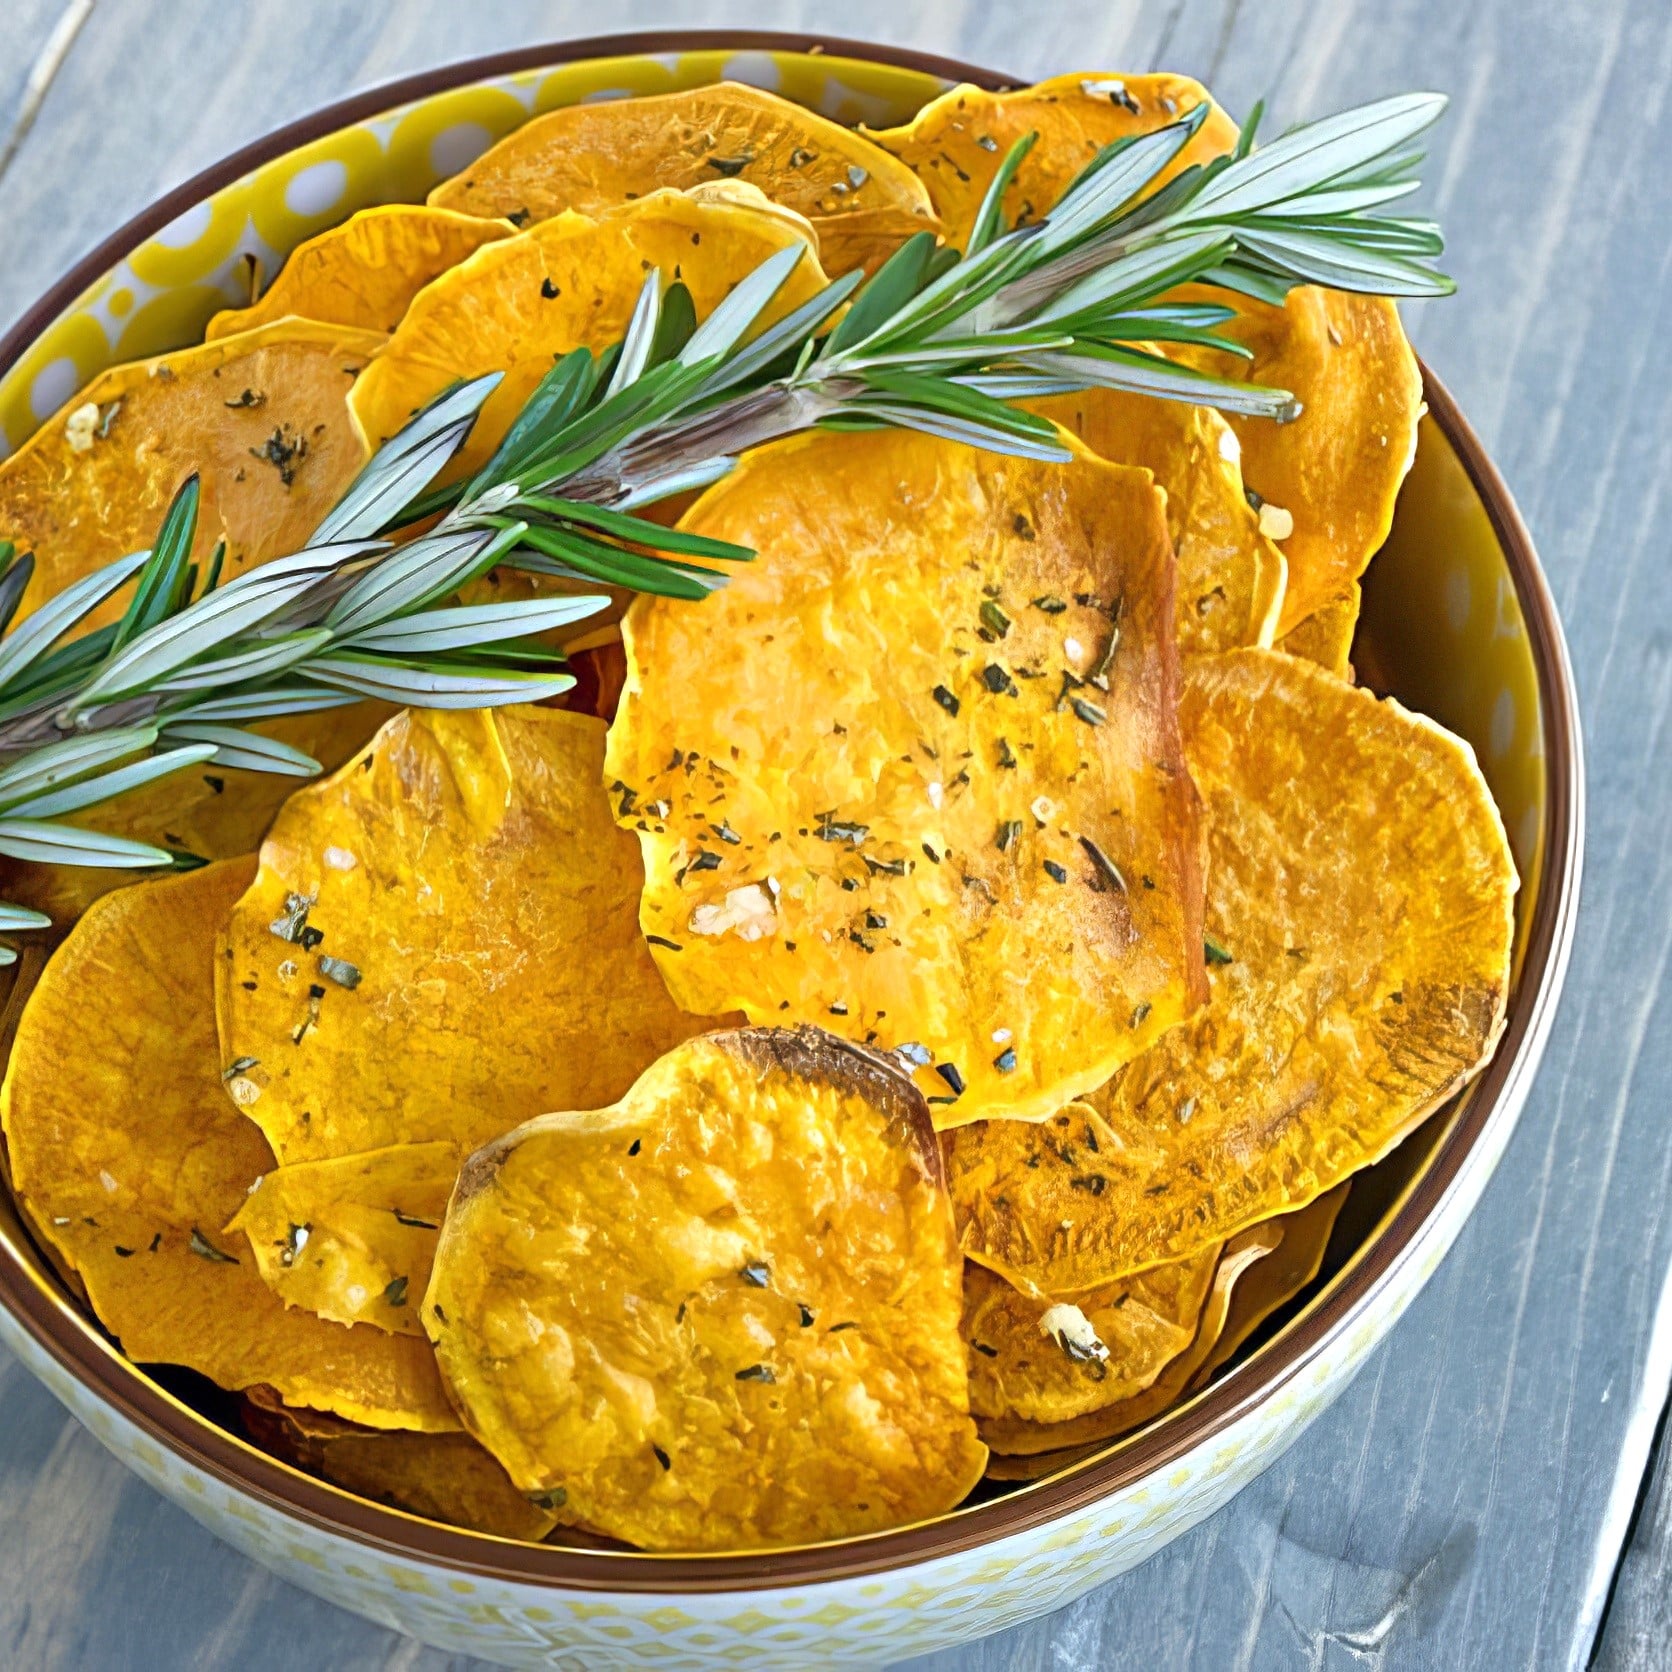 baked sweet potato chips with olive oil, garlic and rosemary